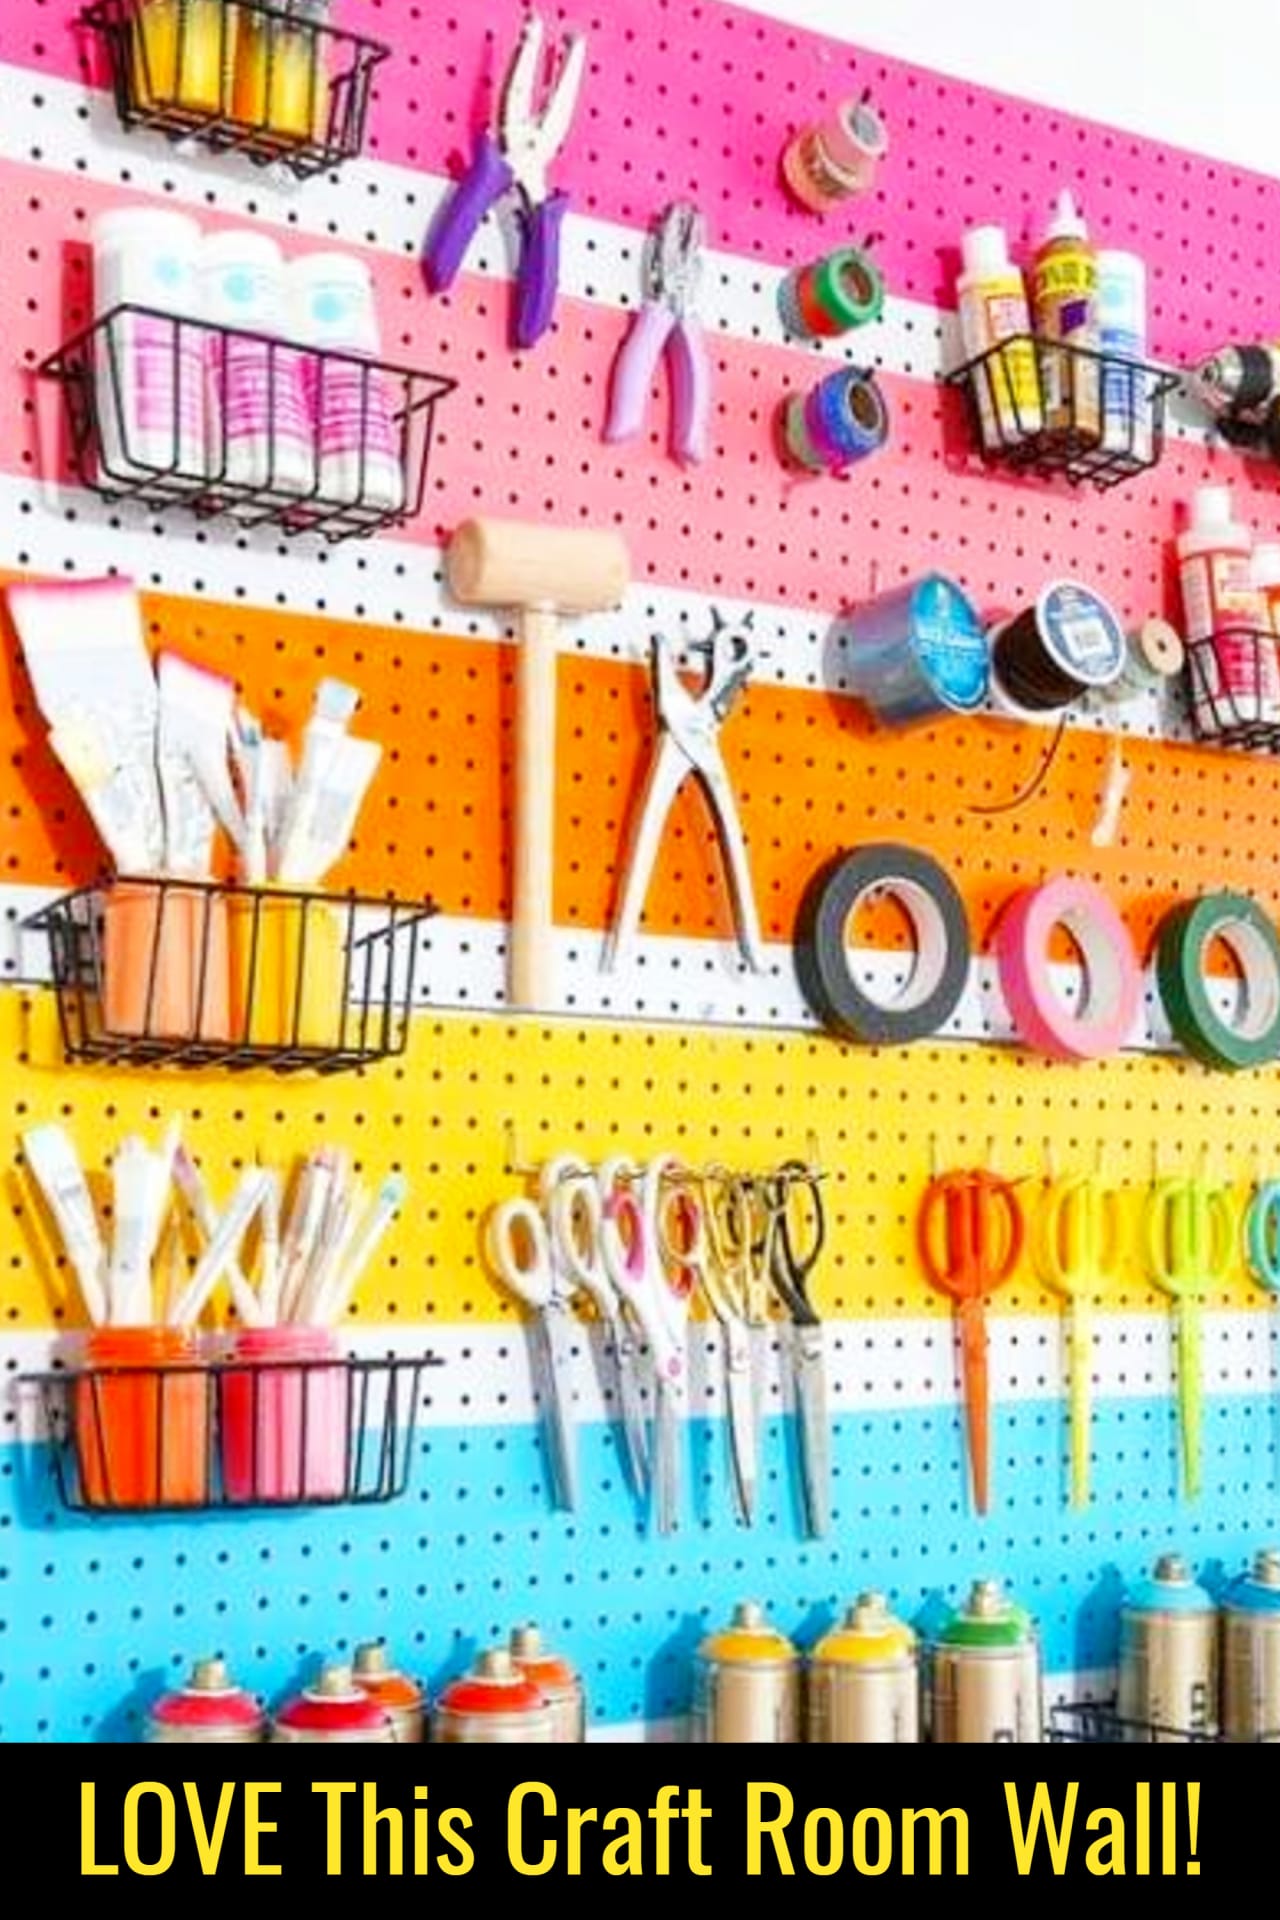 Craft room ideas on a budget - cheap craft room organization ideas - love this craft room wall organizer for organizing my craft supplies!